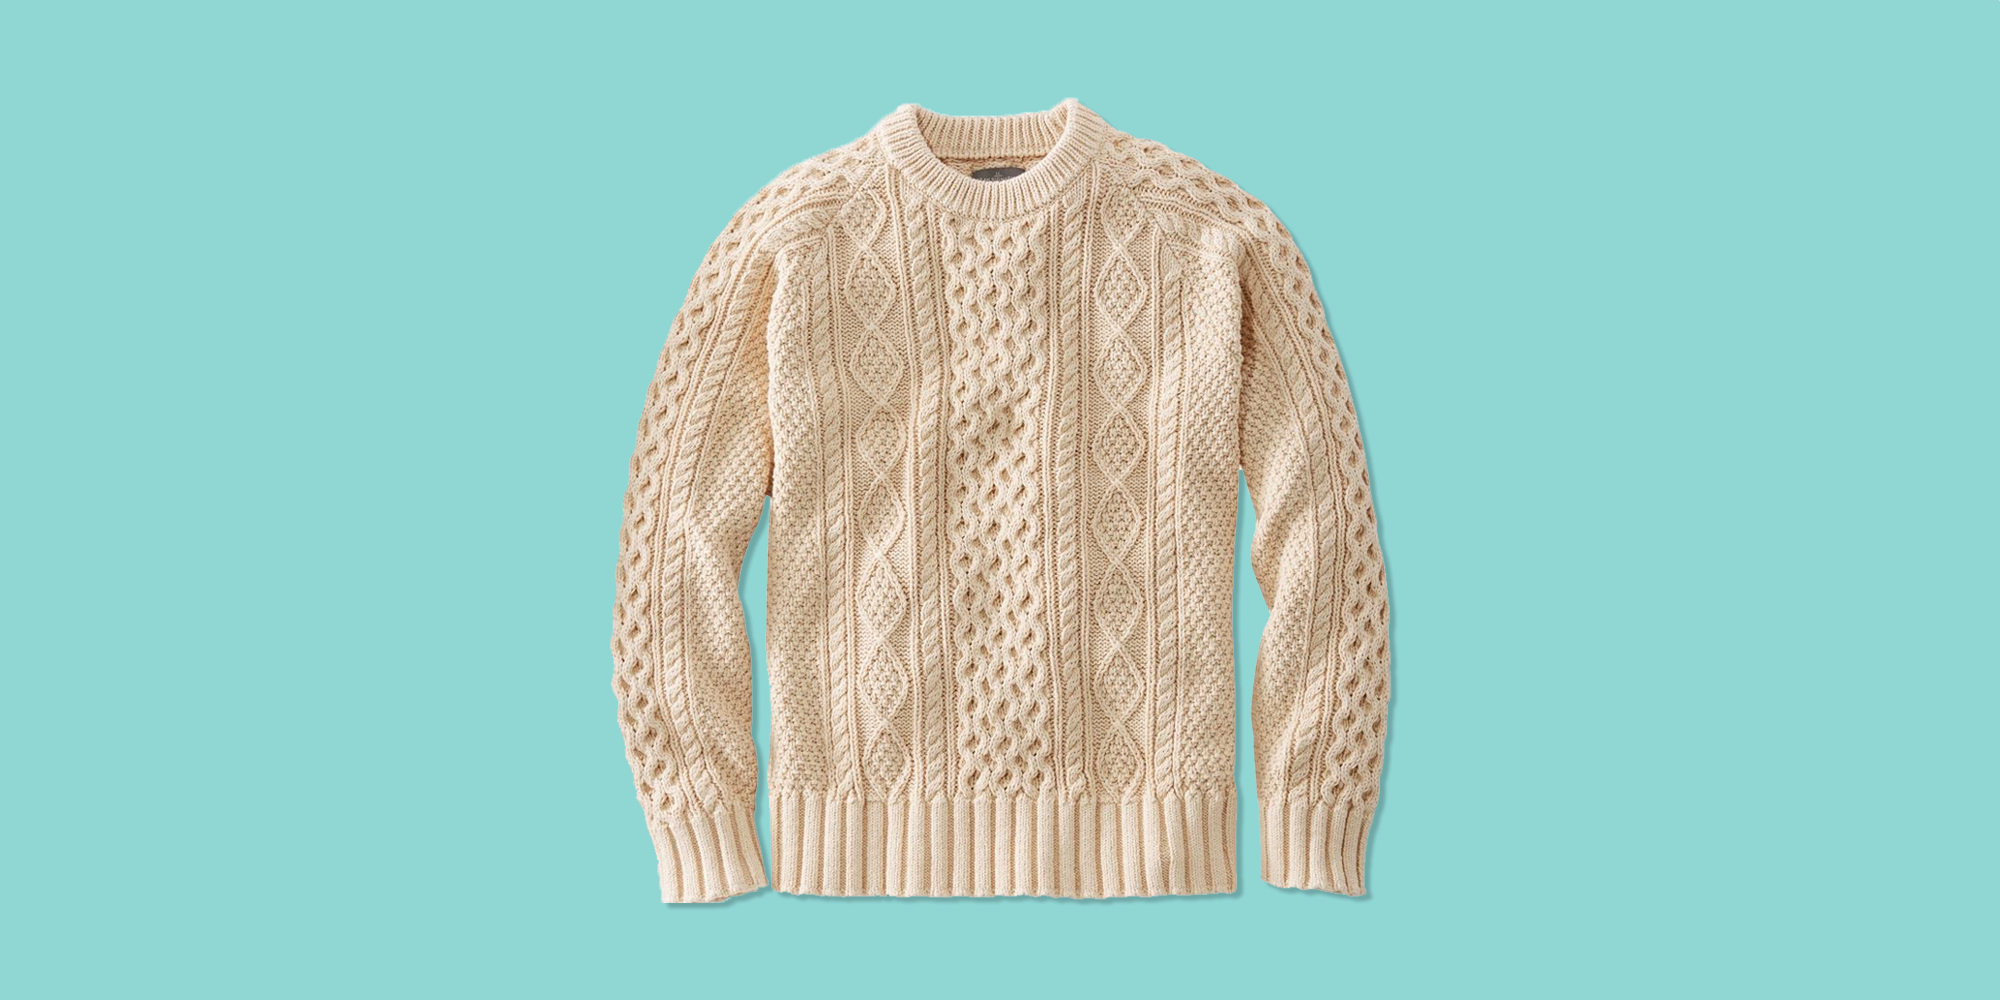 Knitwear for the whole year